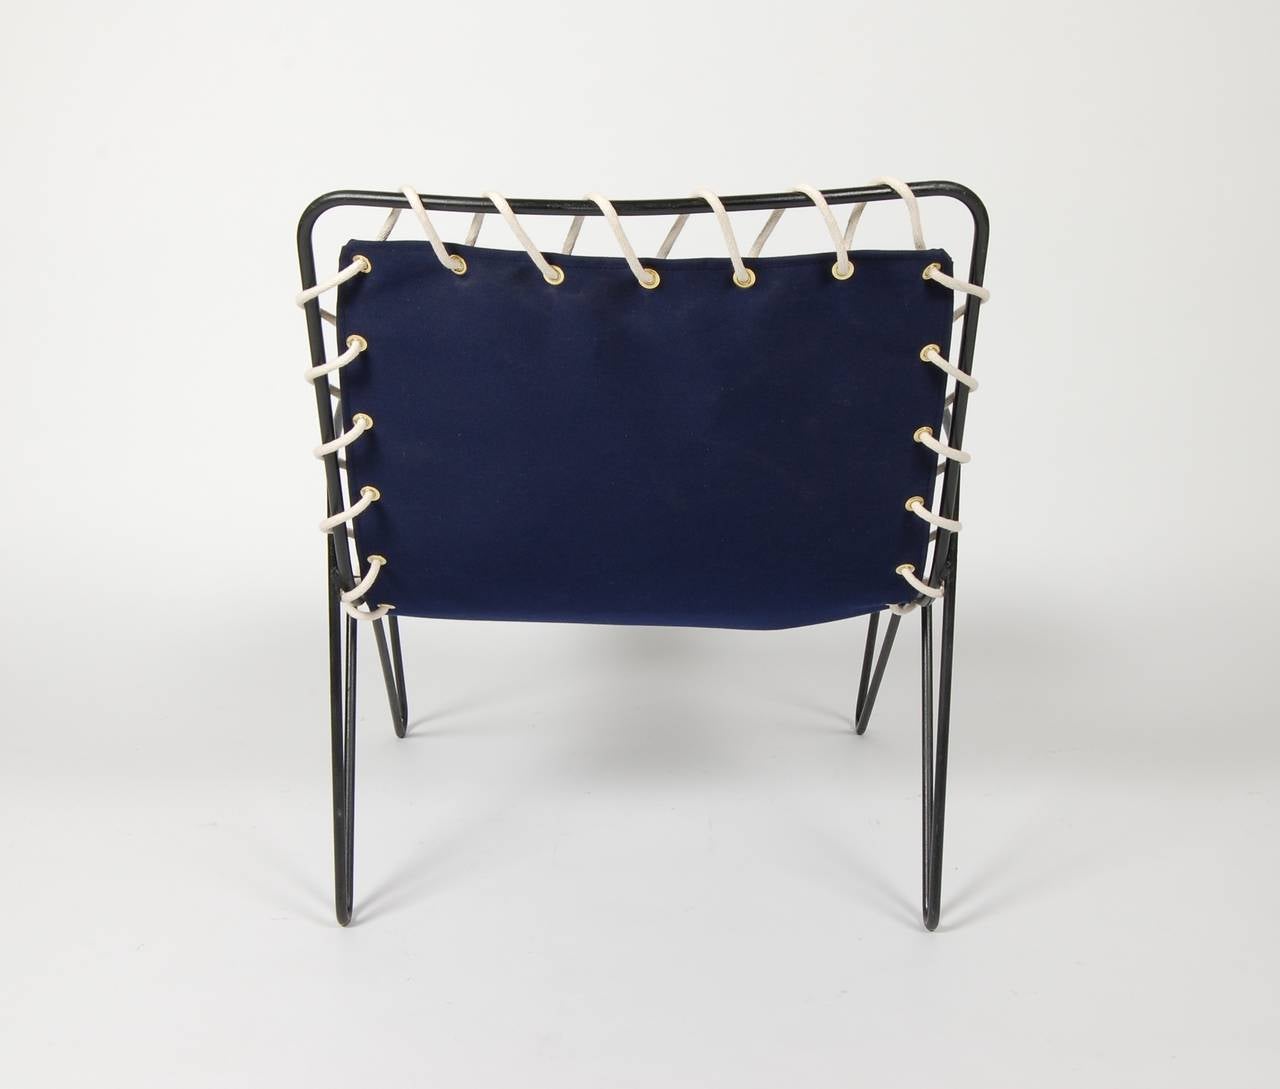 American Modernist Iron and Blue Canvas Patio Lounge Chair, 1950s